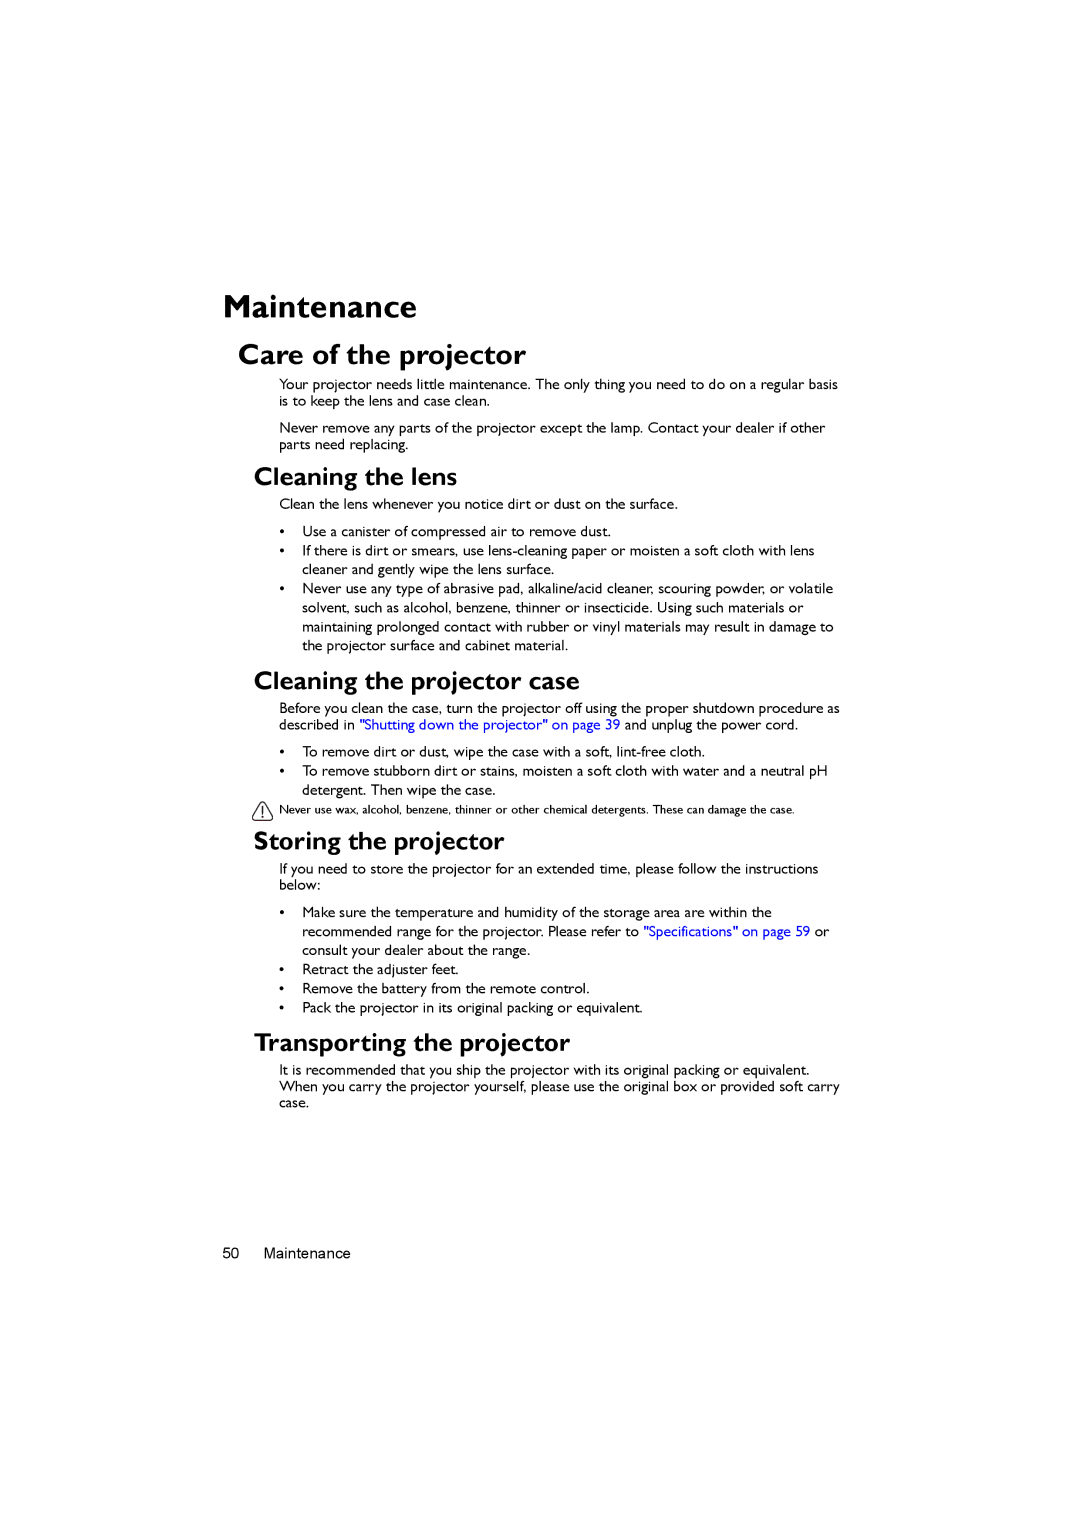 BenQ MX716, MX717 user manual Maintenance, Care of the projector 